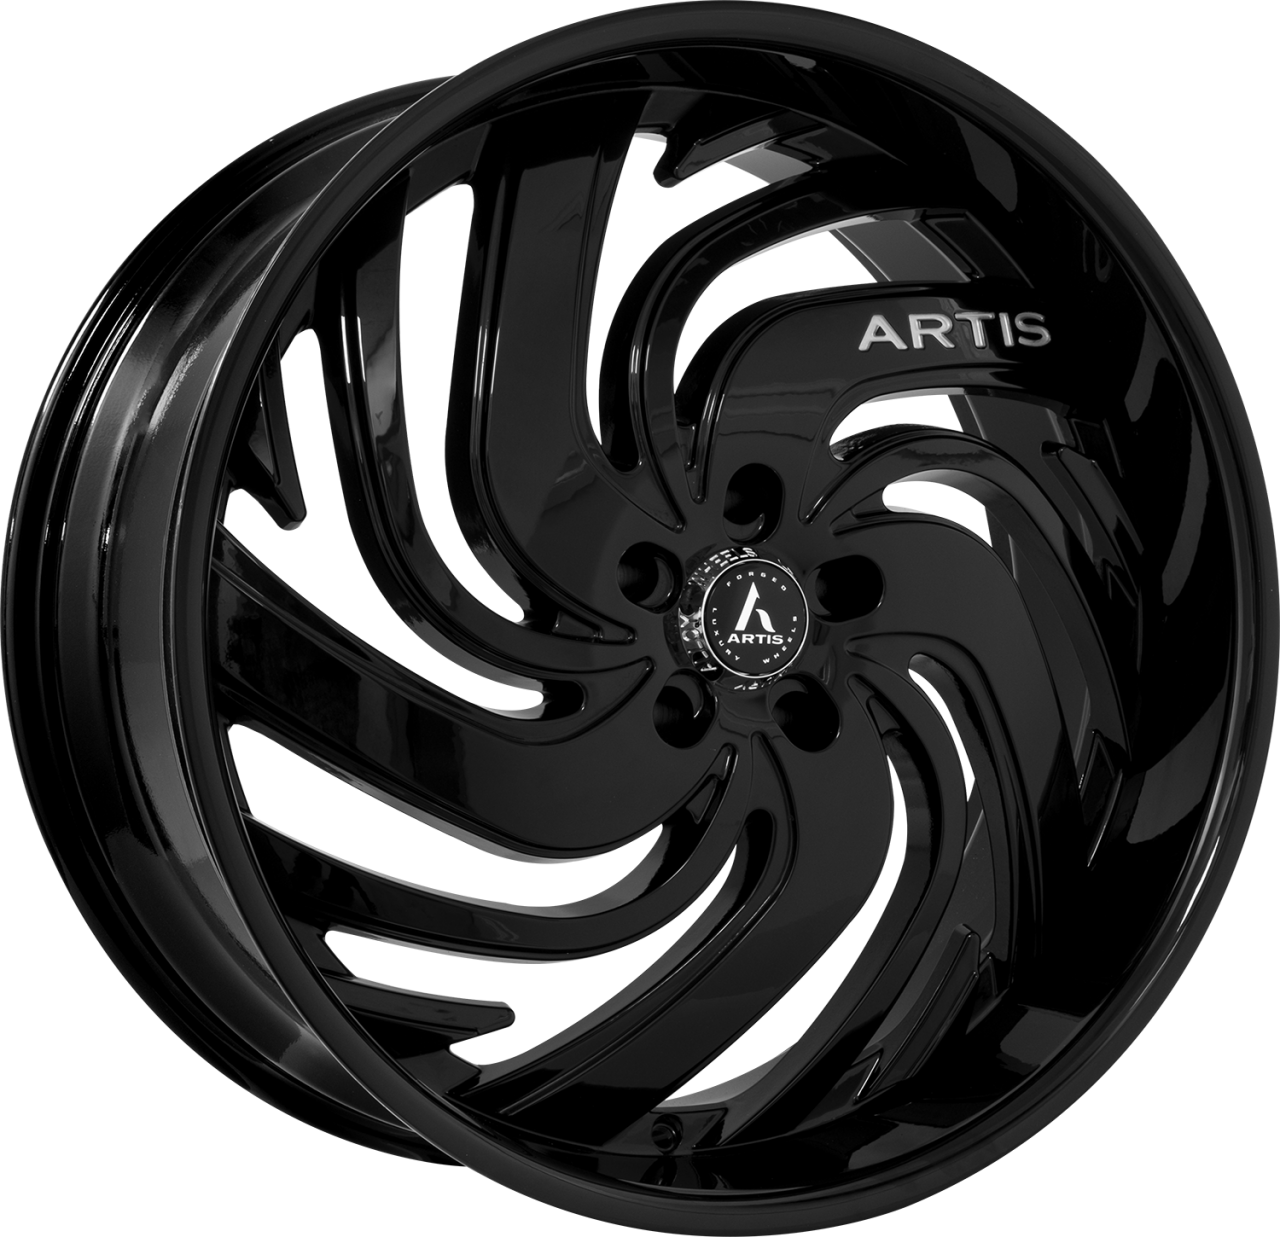 Artis Forged Fillmore wheel with Full Black finish